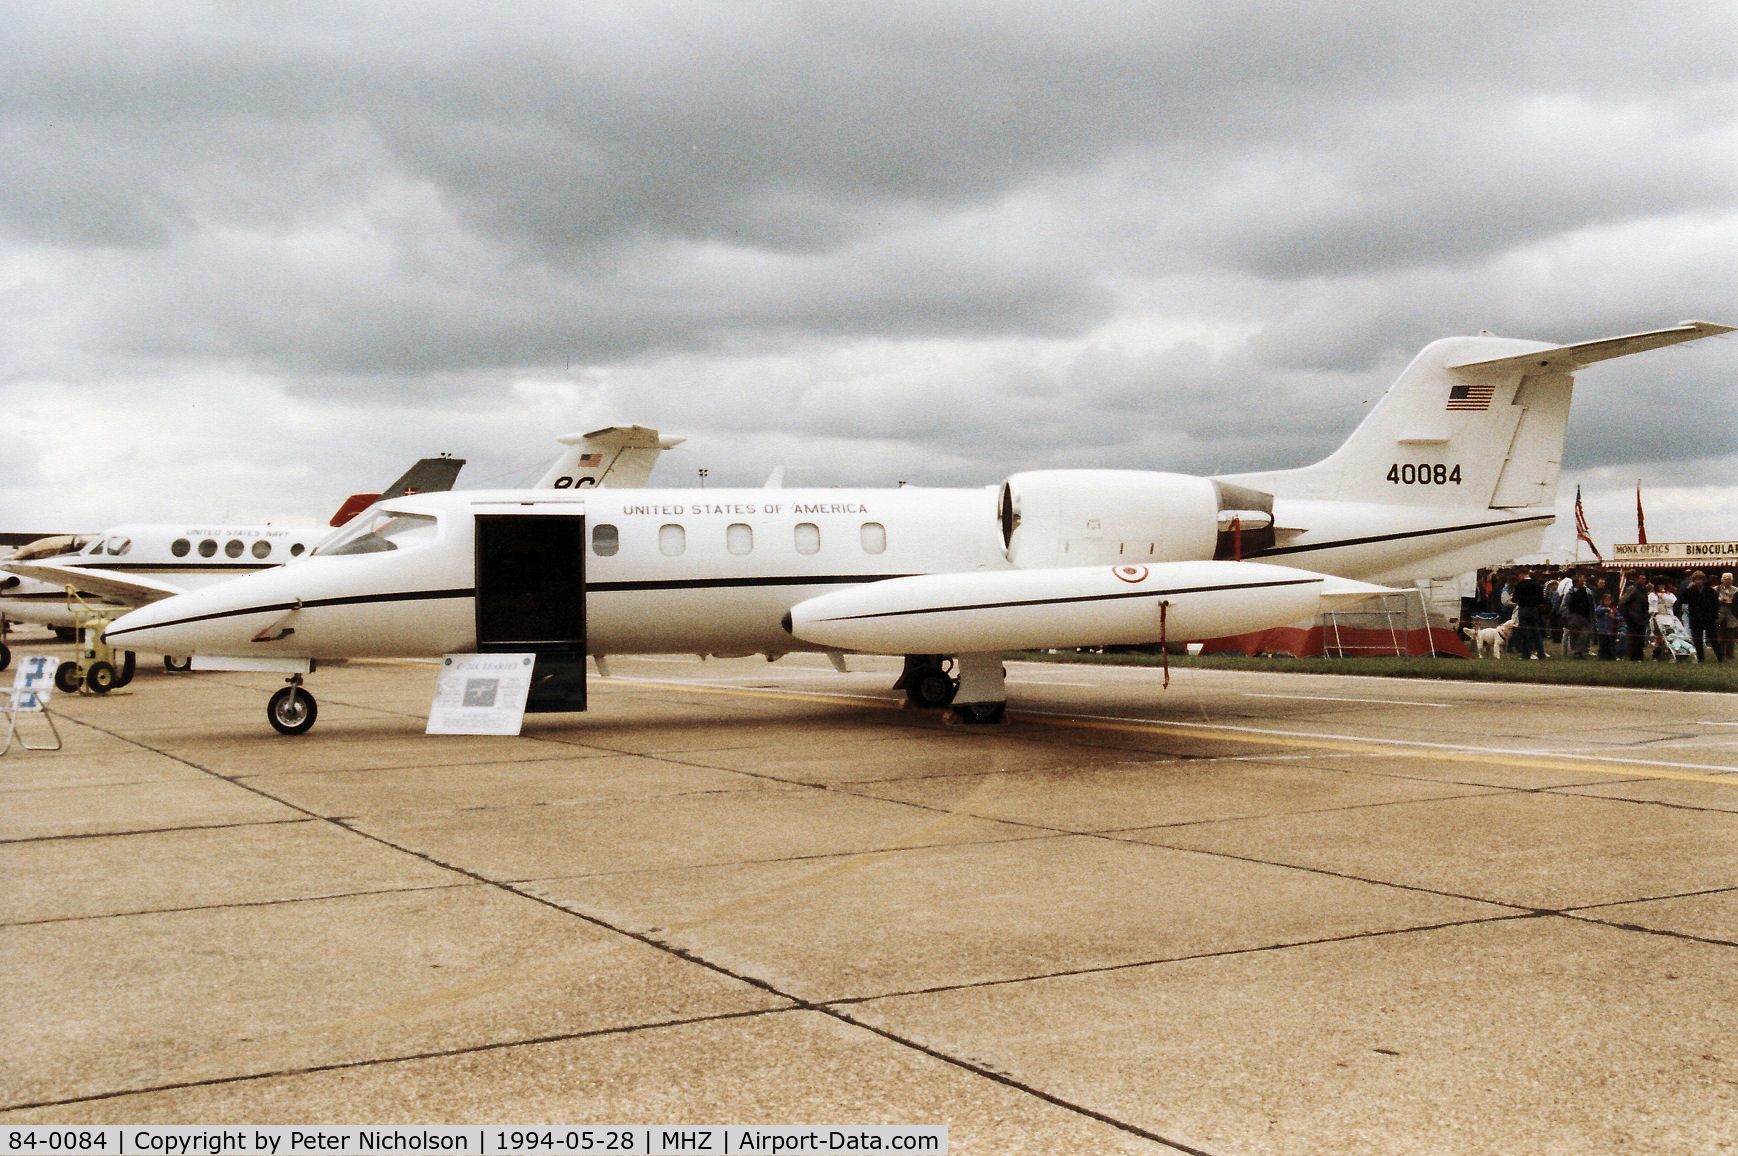 84-0084, 1984 Gates Learjet C-21A C/N 35A-530, C-21A Learjet of the 76th Airlift Squadron/86th Airlift Wing at Ramstein Air Base on display at the 1994 RAF Mildenhall Air Fete.